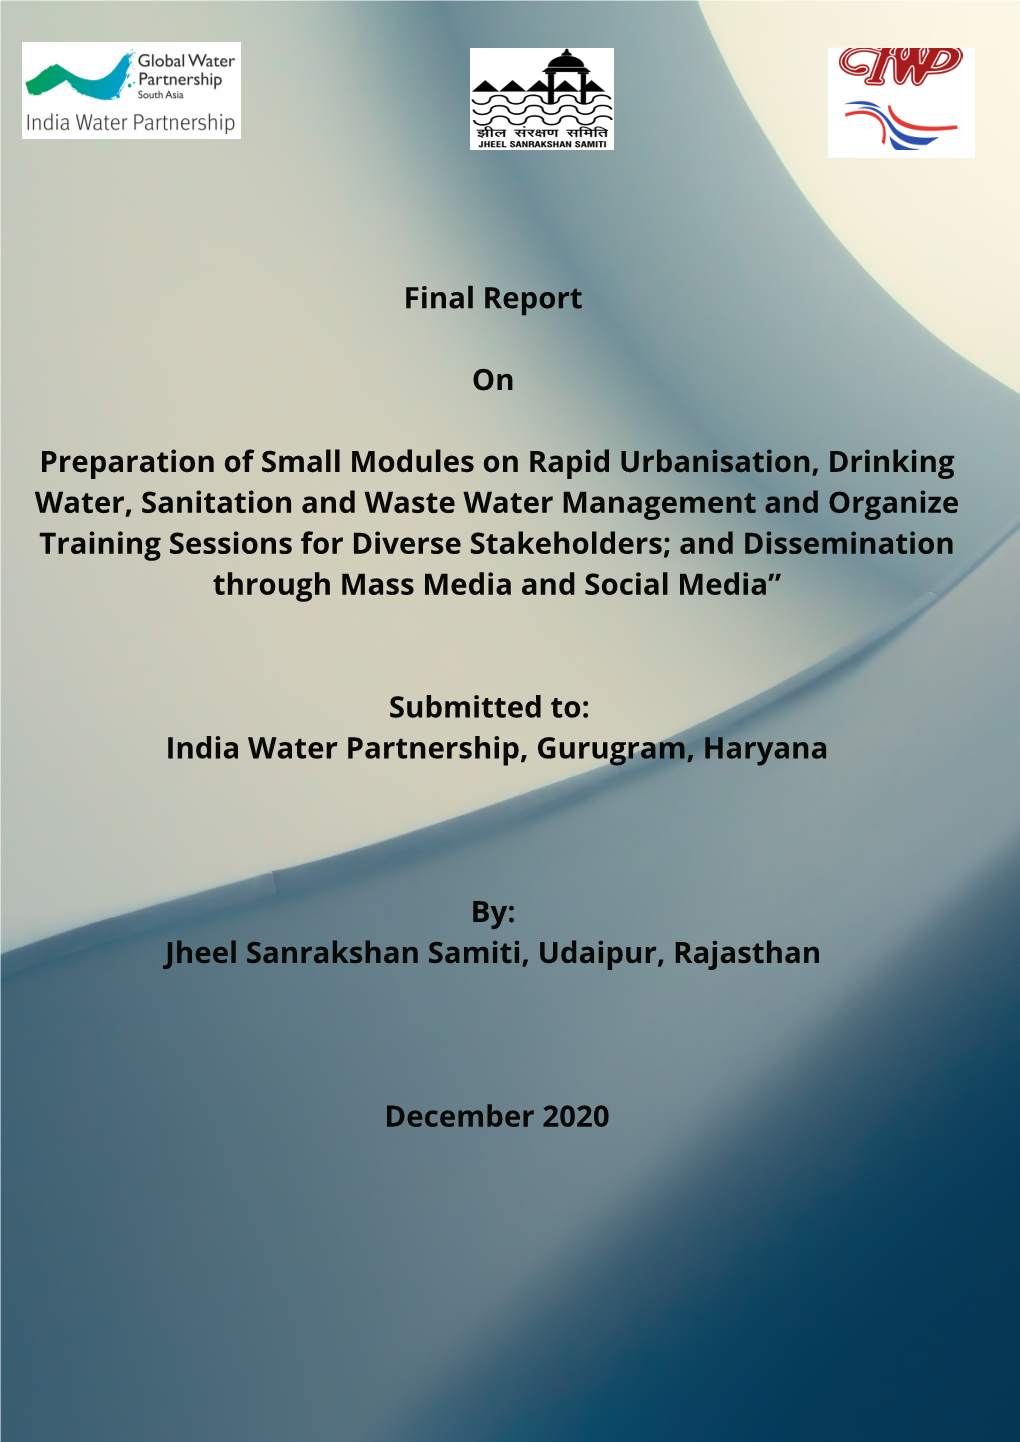 Final Report on Preparation of Small Modules on Rapid Urbanisation